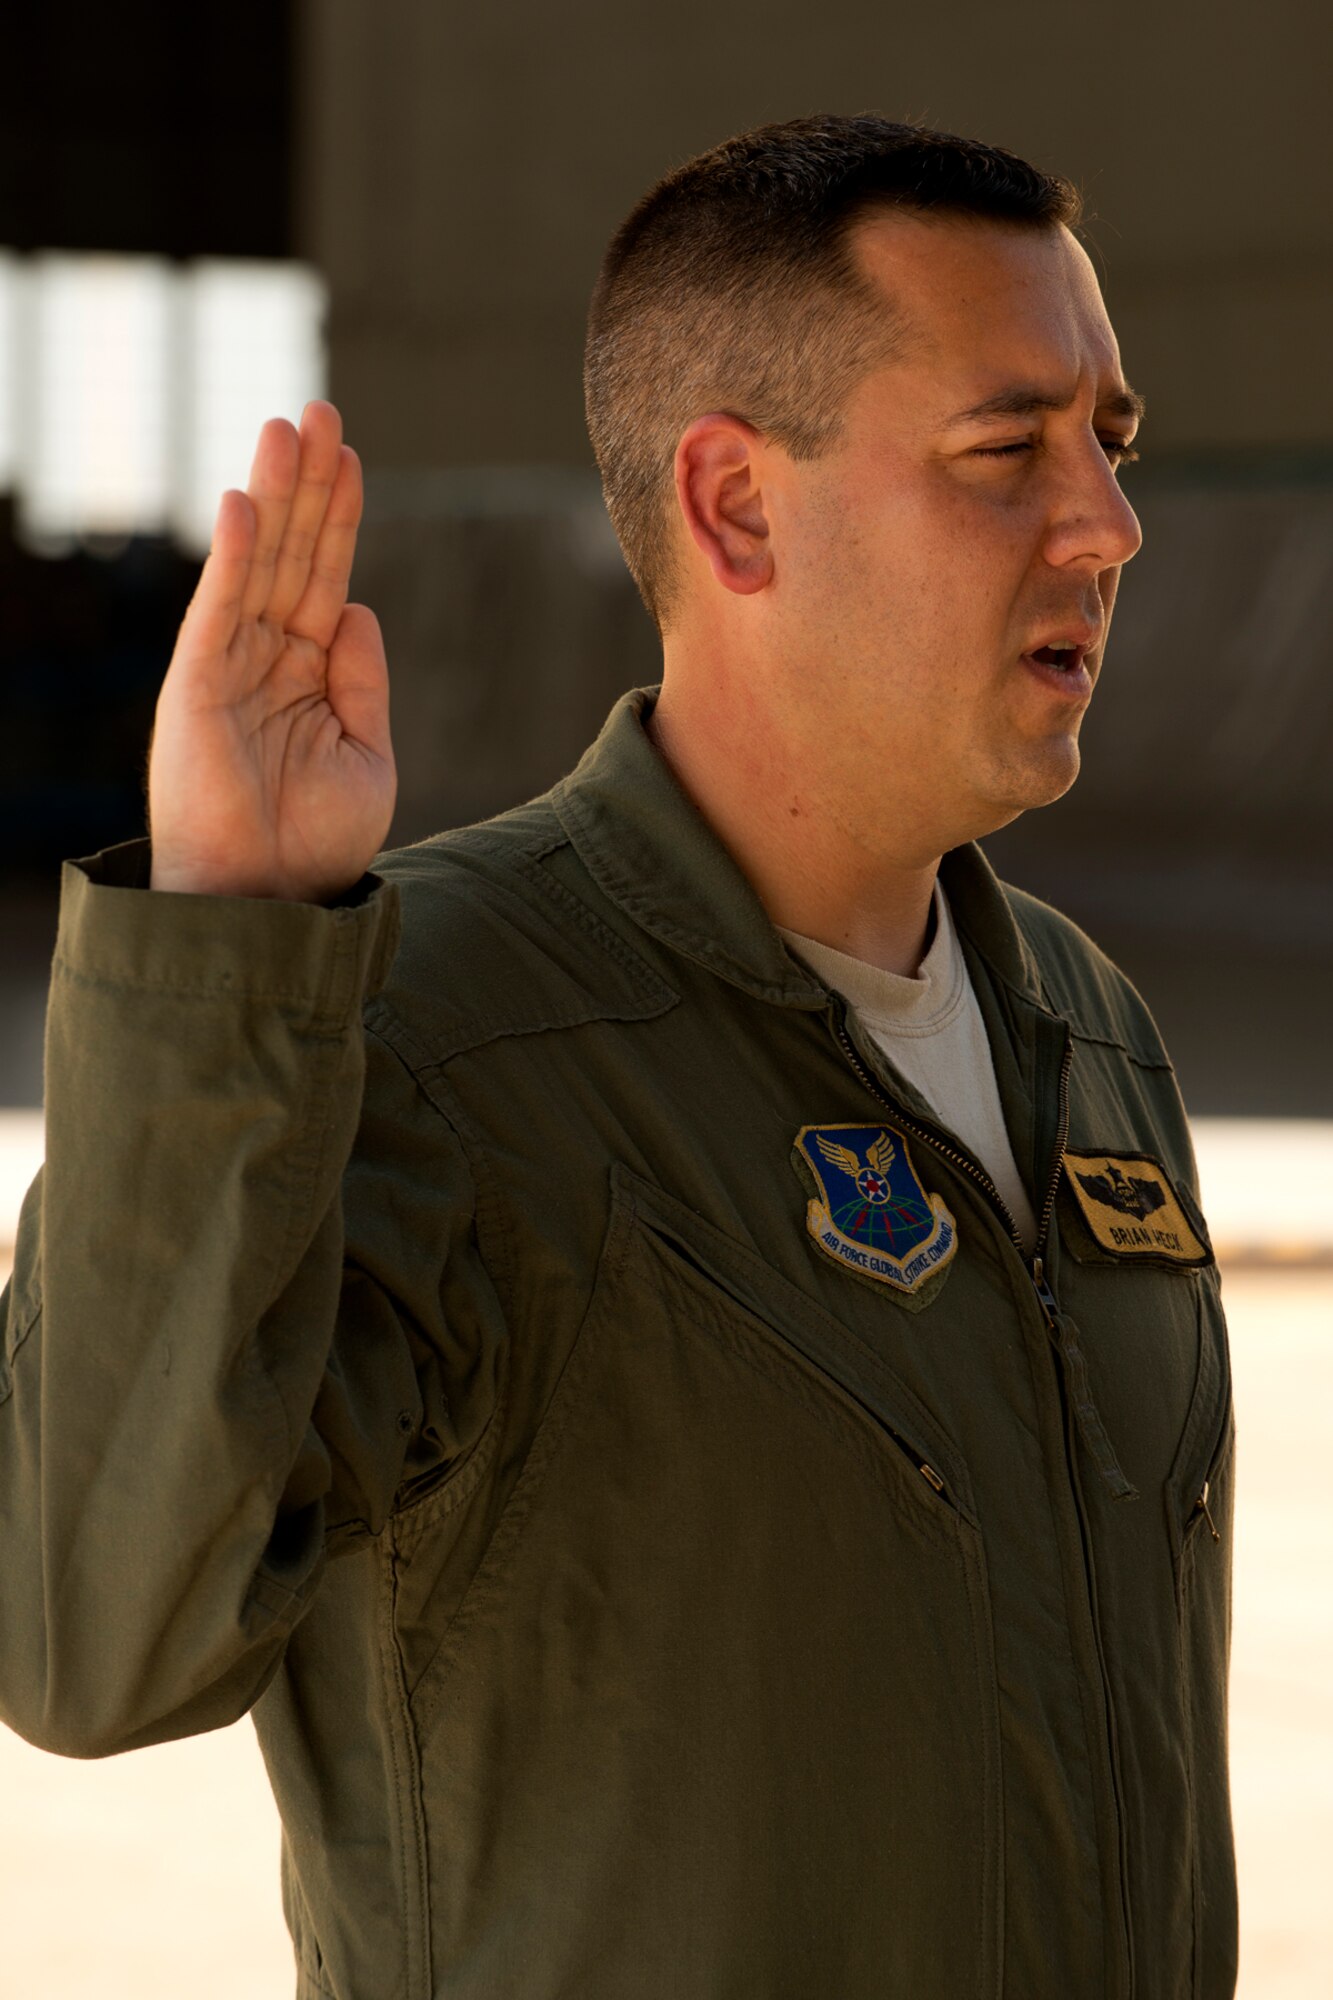 U.S. Air Force Maj. Brian Heck repeats the oath during a Pinning On ceremony, Sept. 28, 2012, Barksdale Air Force Base, La. Heck is assigned to the 11th Bomb Squadron at Barksdale. (U.S. Air Force photo by Master Sgt. Greg Steele/Released)